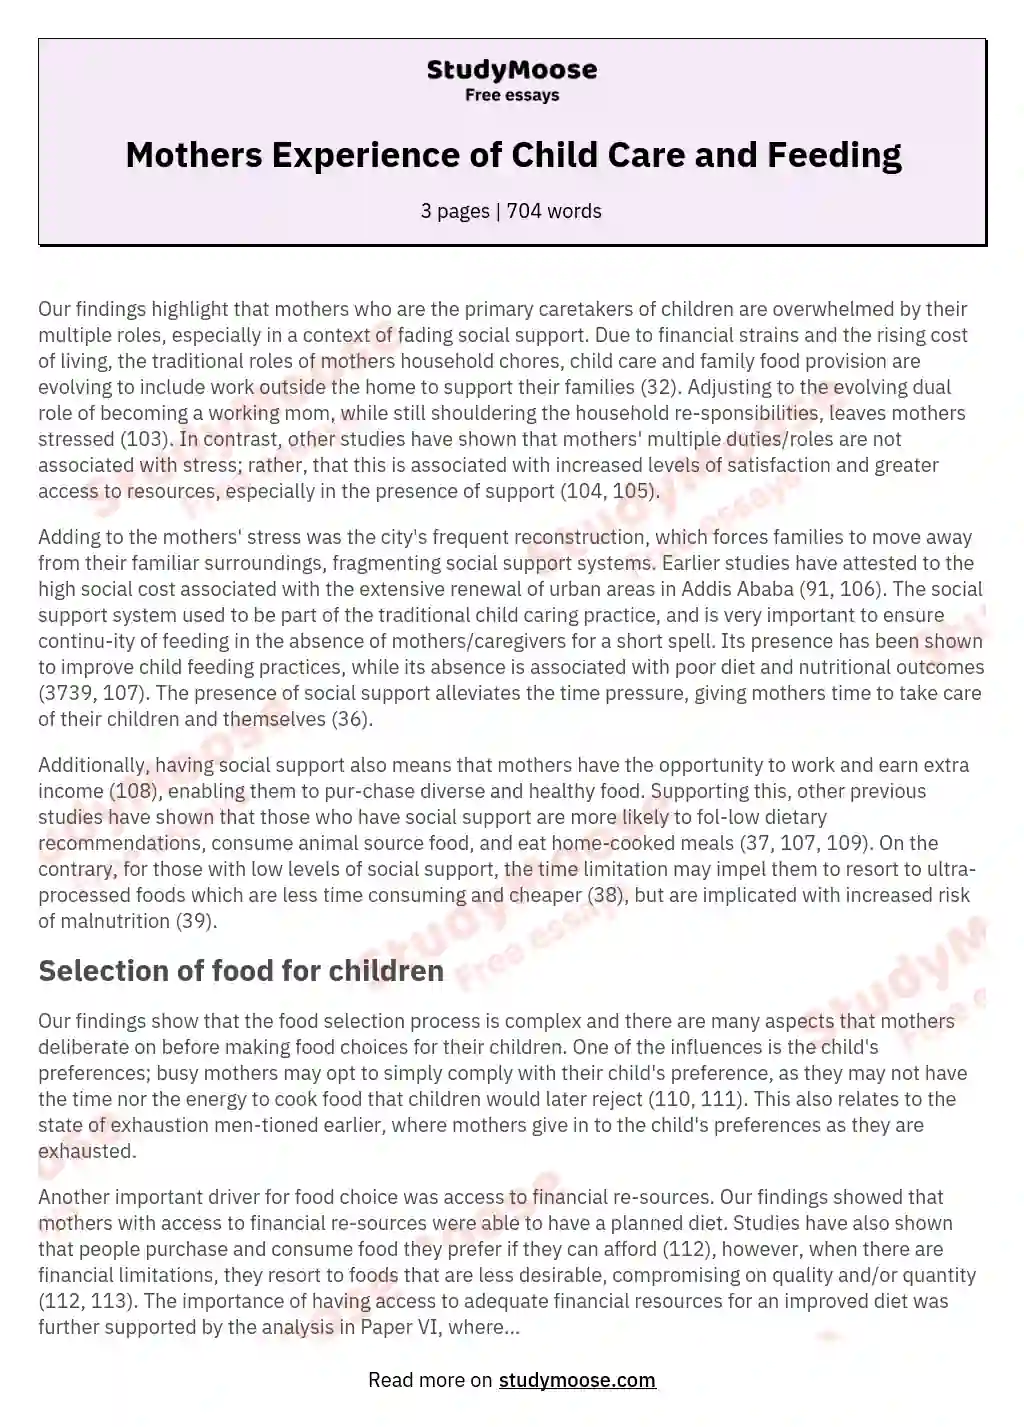 Mothers Experience of Child Care and Feeding essay